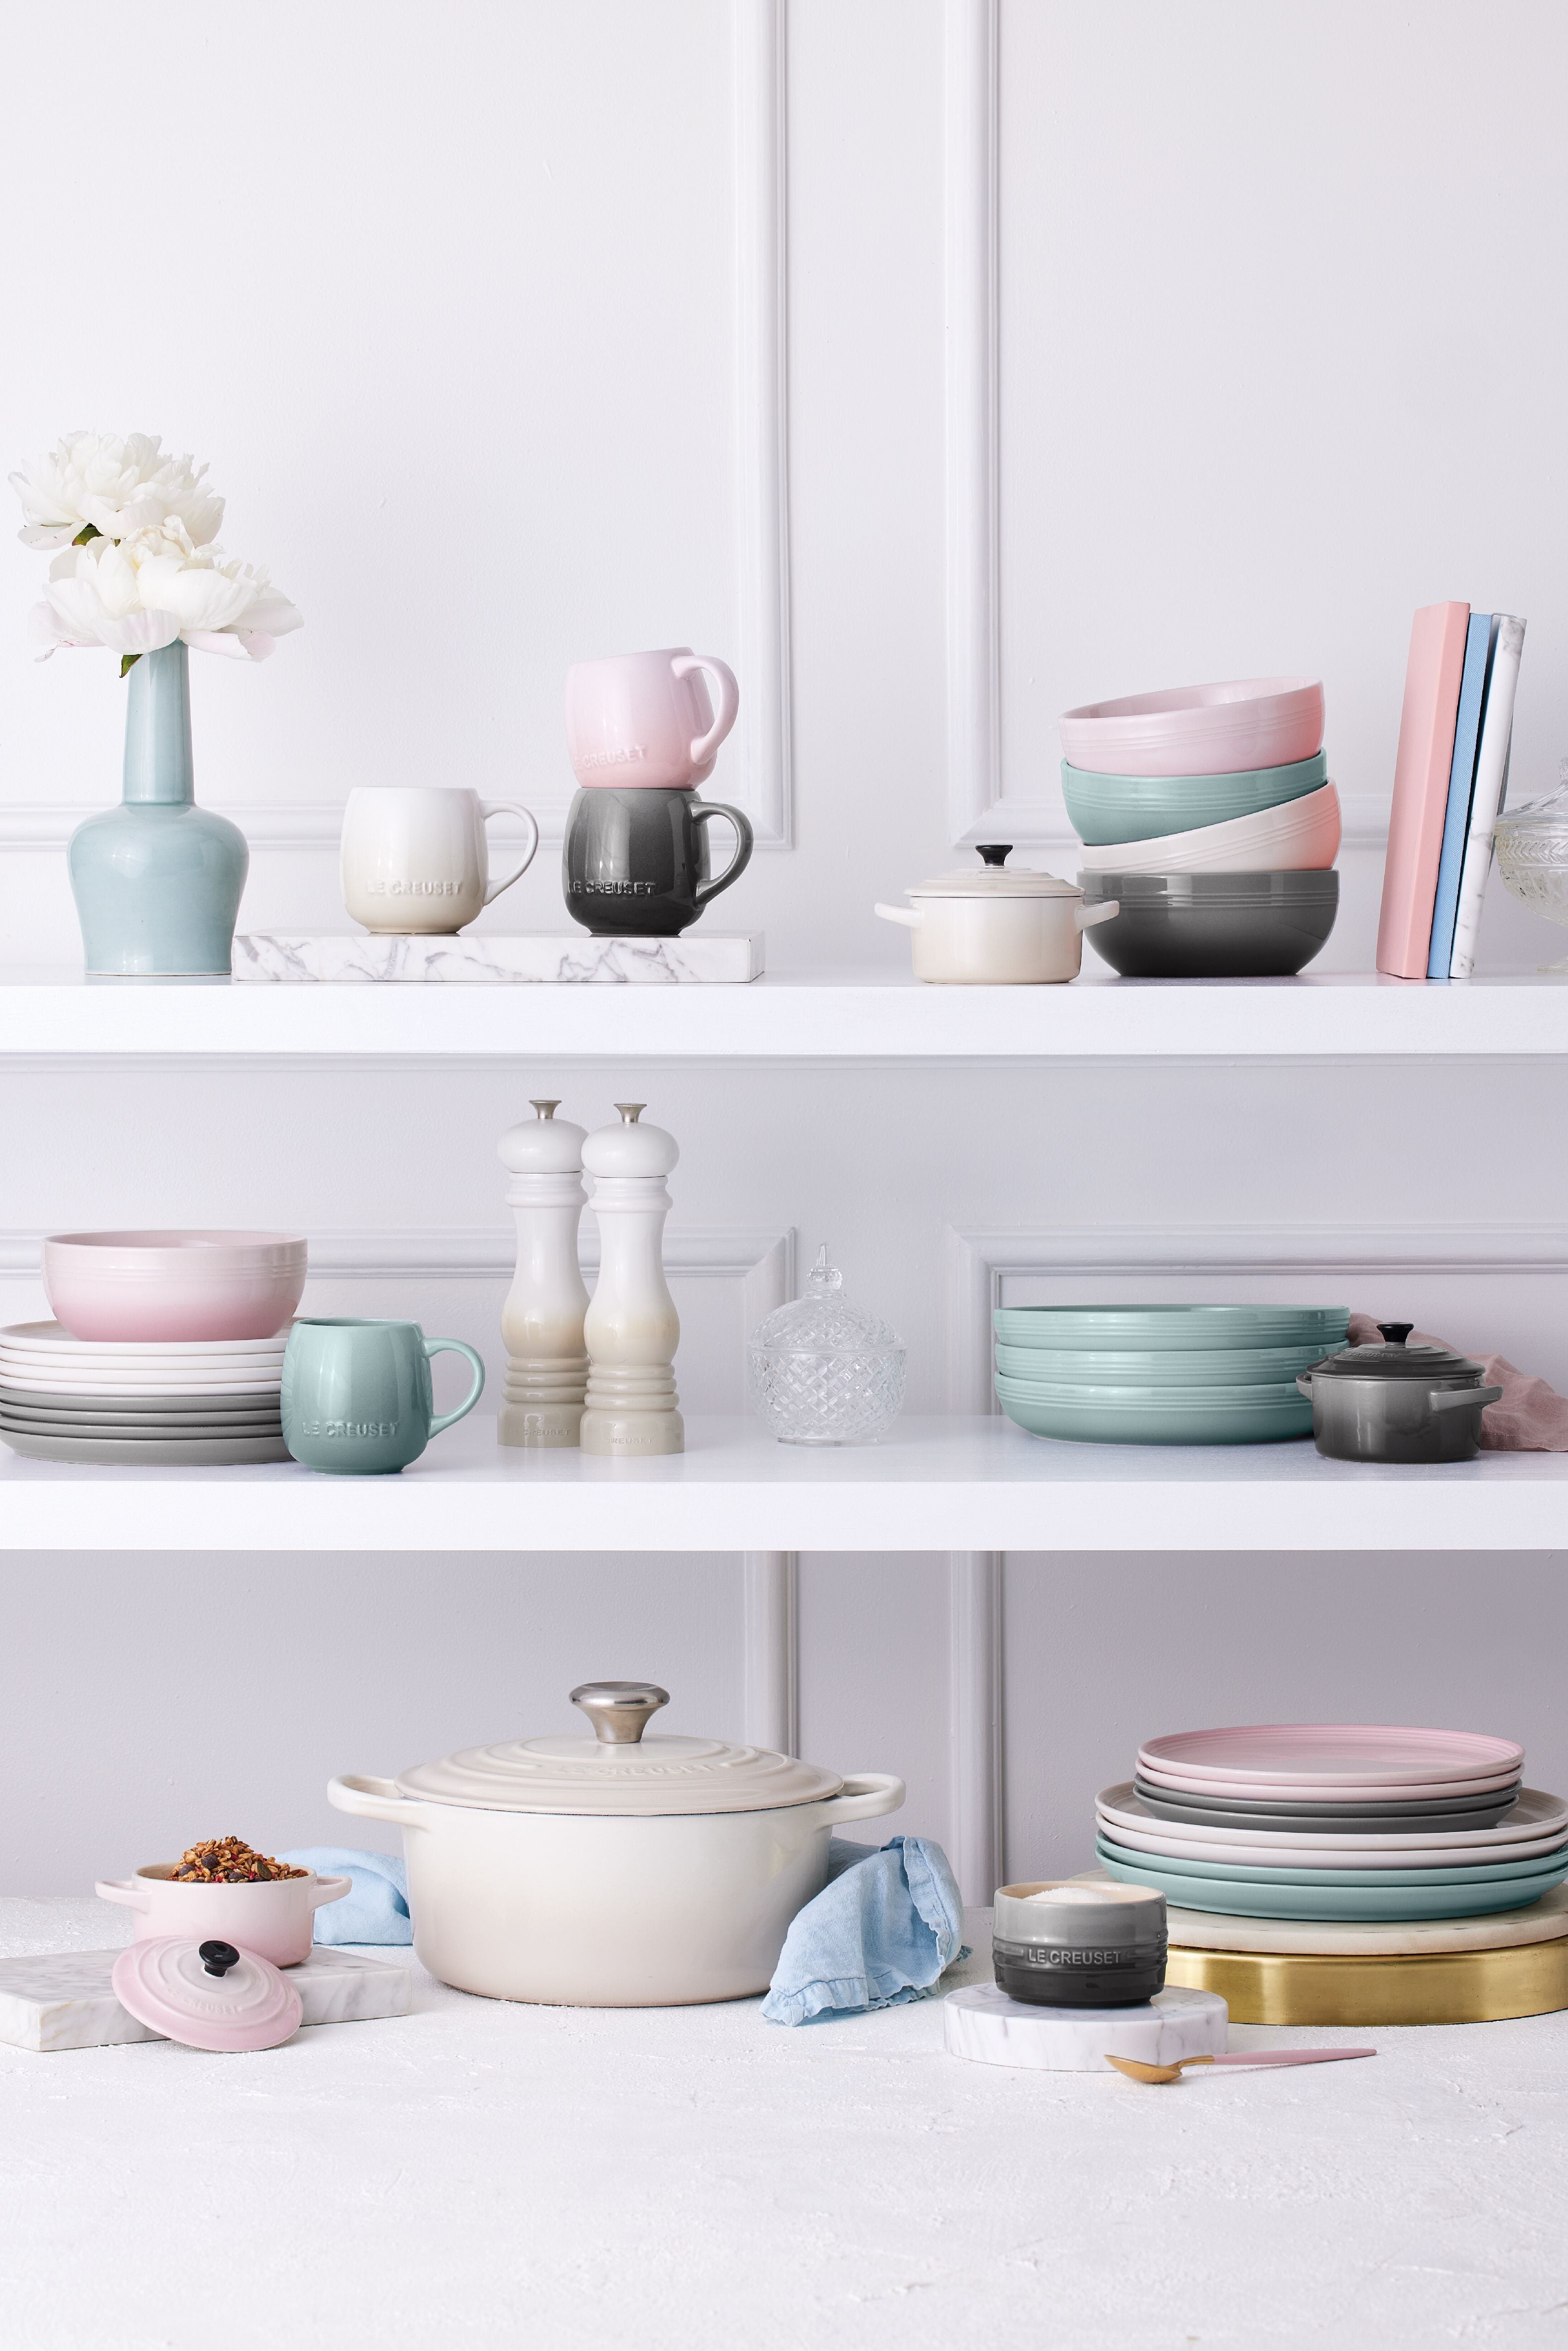 Le creuset coupe pasta skål, shell pink